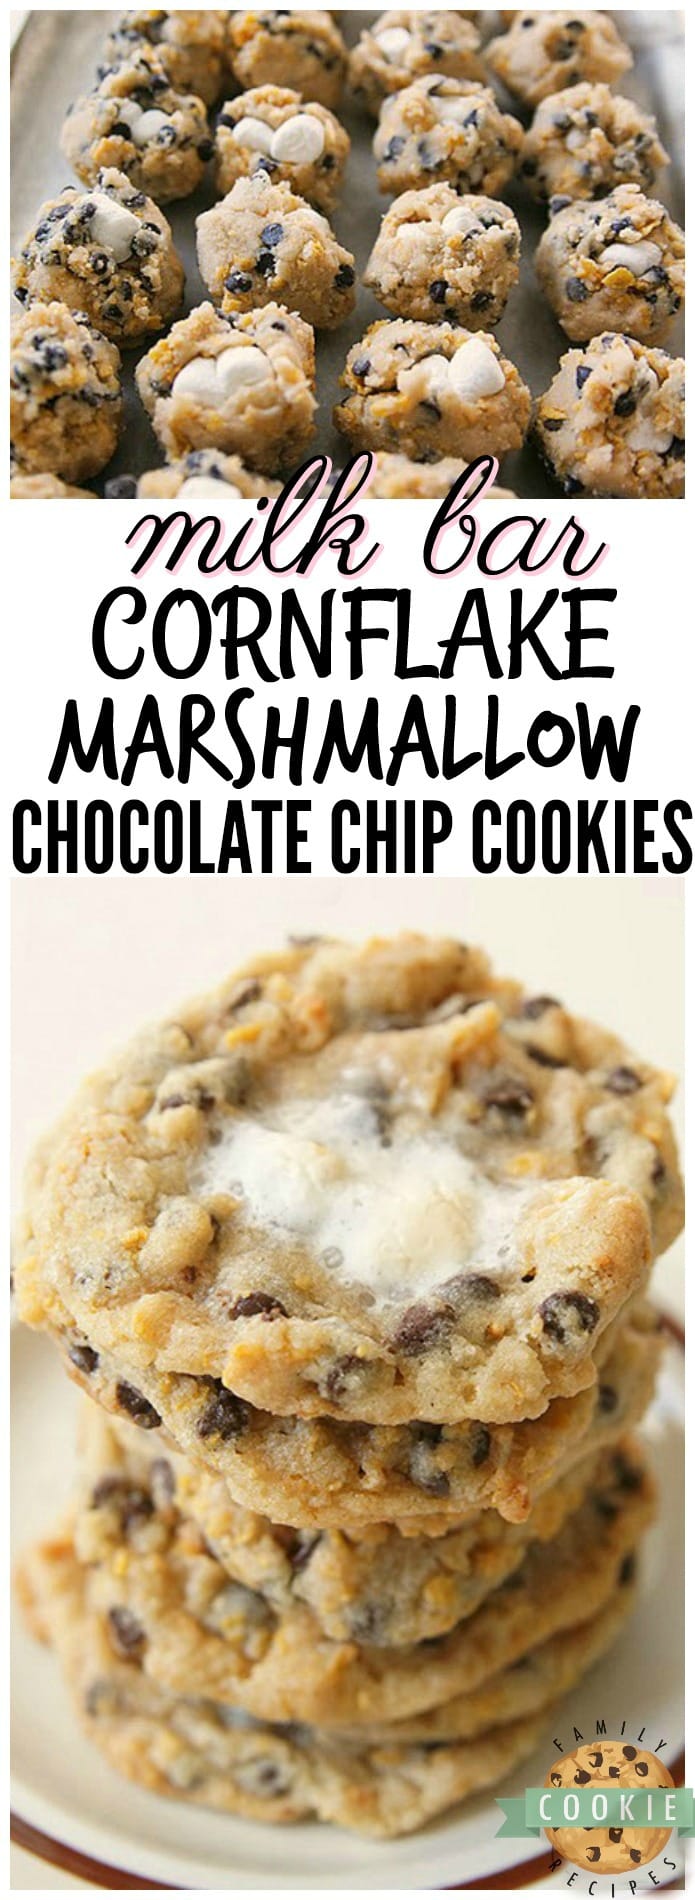 Milk Bar Cornflake Marshmallow Cookies just like the ones served in Momofuku Milk Bar in NYC! I think my version is even BETTER...and they're easier to make! See my tips and tricks on making these incredible cornflake chocolate chip cookies in your own kitchen.